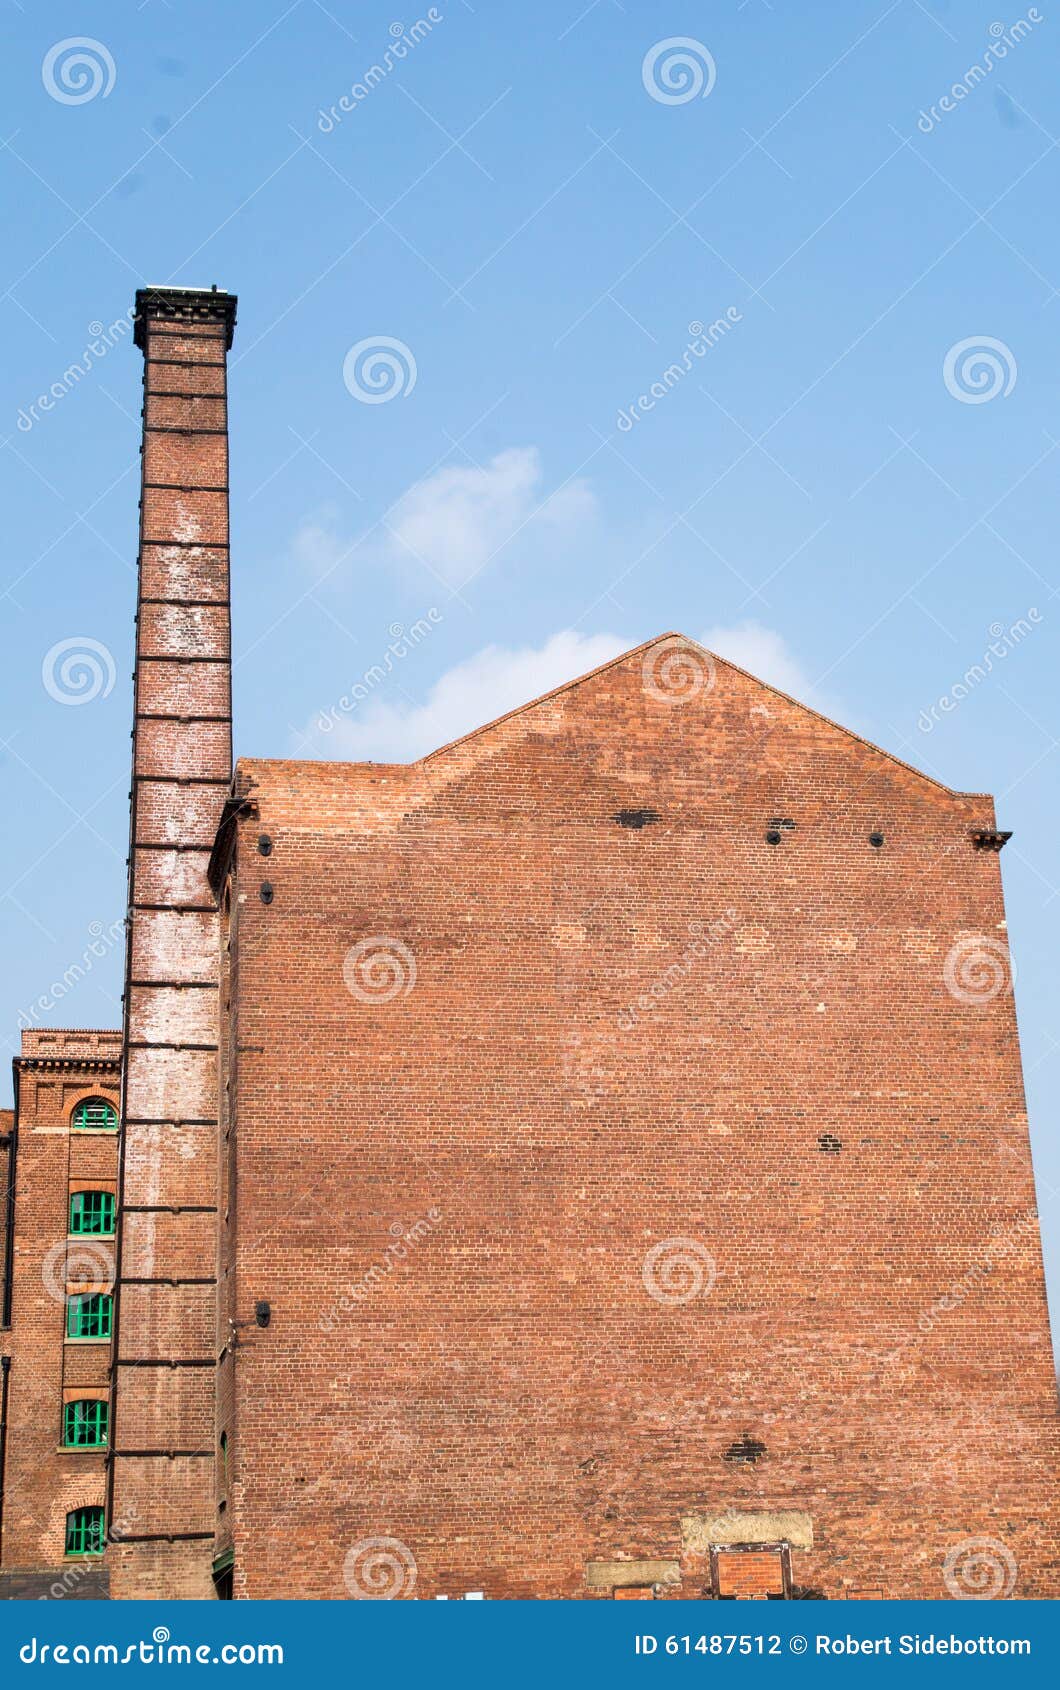 Brick Factory And Chimney Against A Blue Sky Stock Photo Image Of Smoketubes Building 61487512